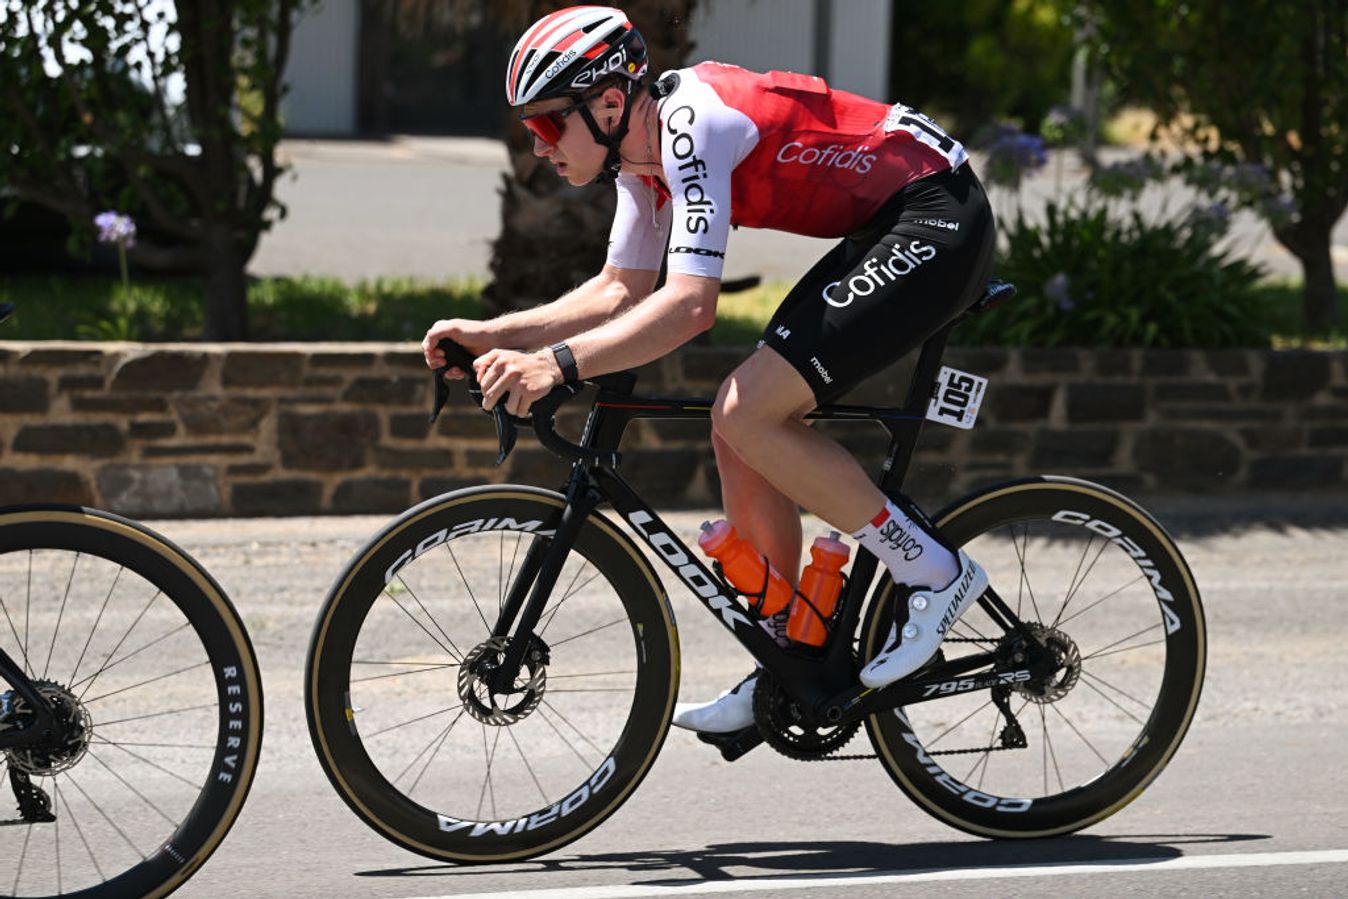 Knight kicked off his season at the Tour Down Under this January 